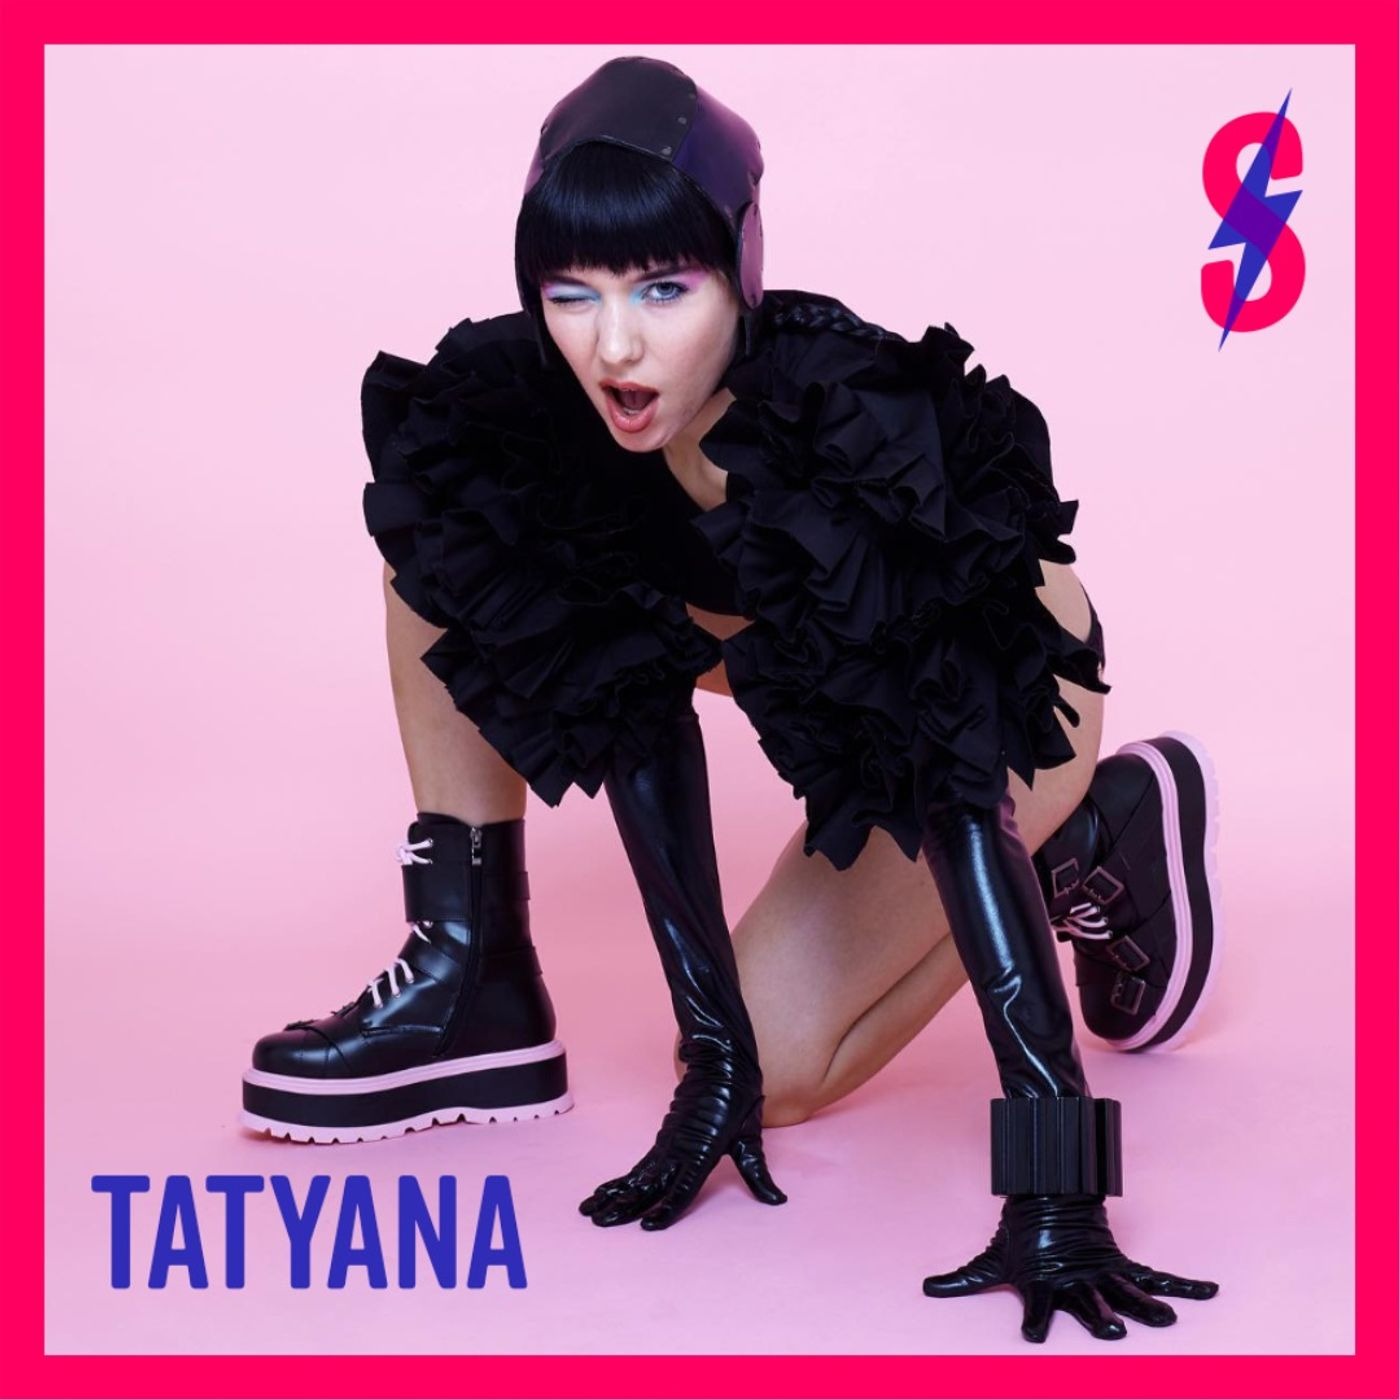 The Lifeblood Of Pop: TATYANA Is Sparked By ABBA Gold